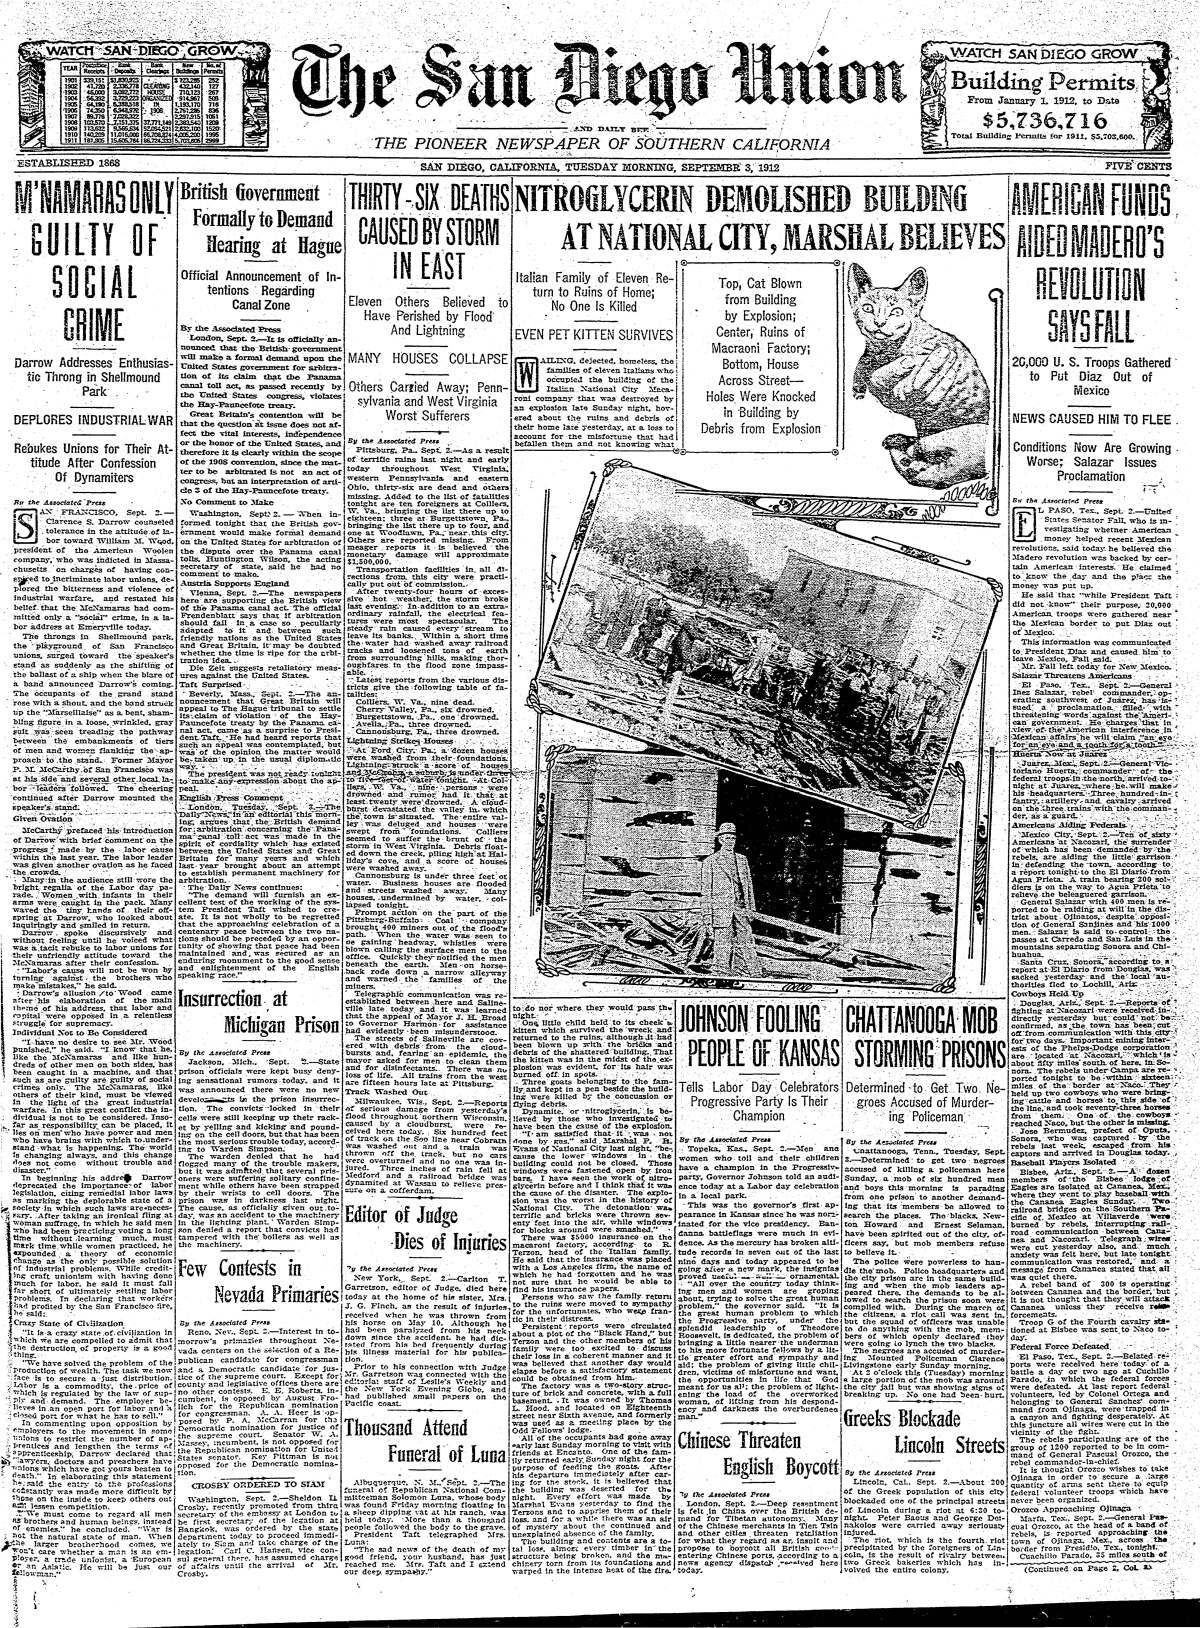 Front page of The San Diego Union and Daily Bee, September 3, 1912.